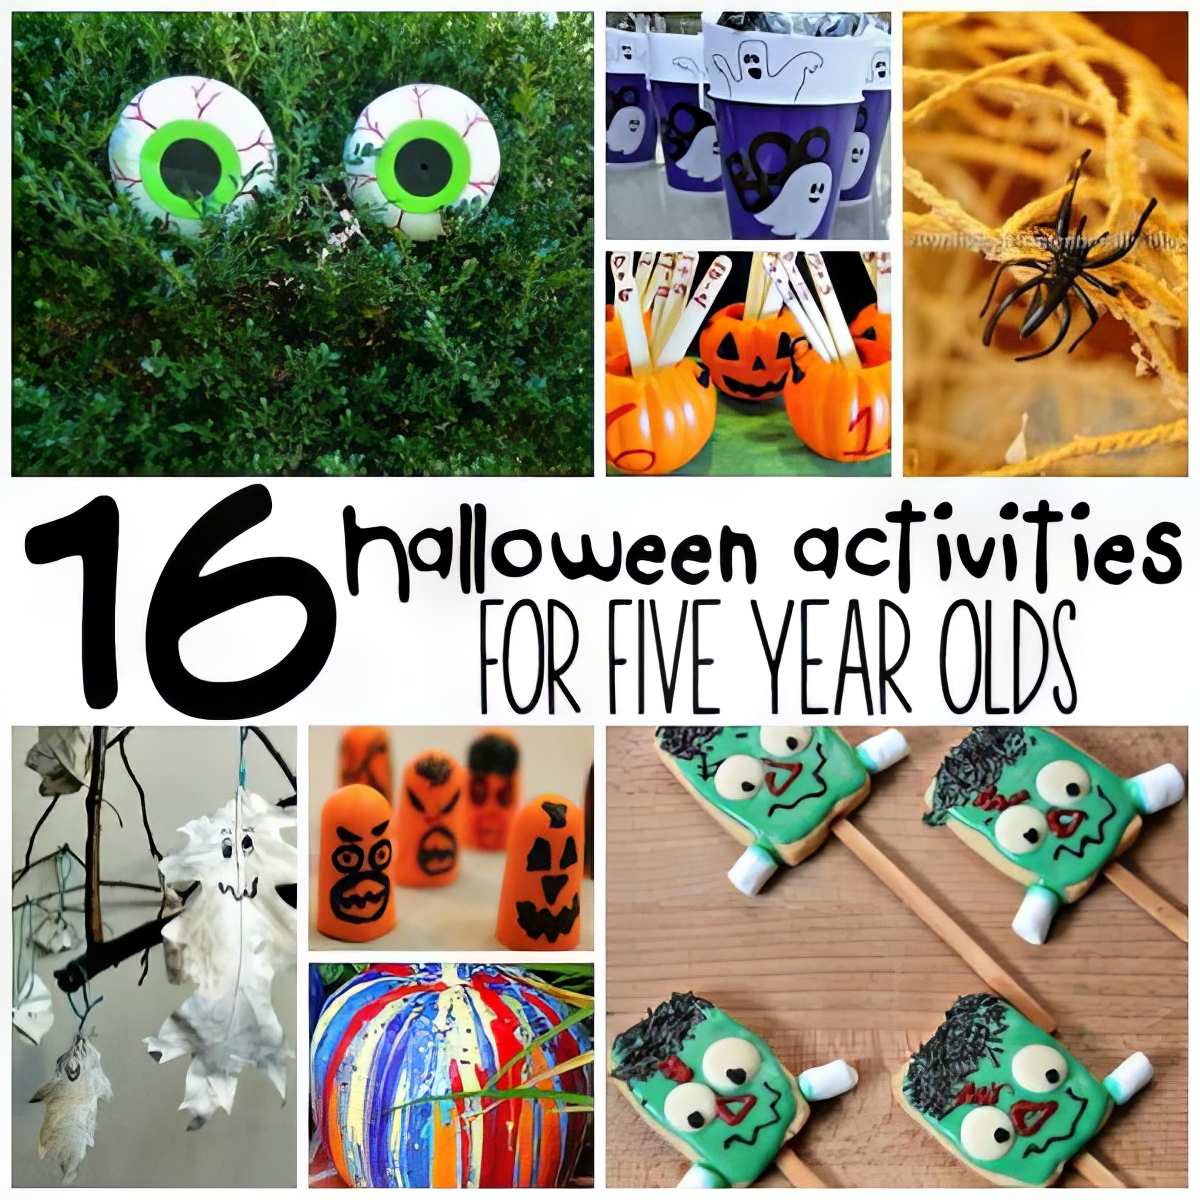 halloween-5-year-olds, Fun Halloween Activities For 5-Year-Olds